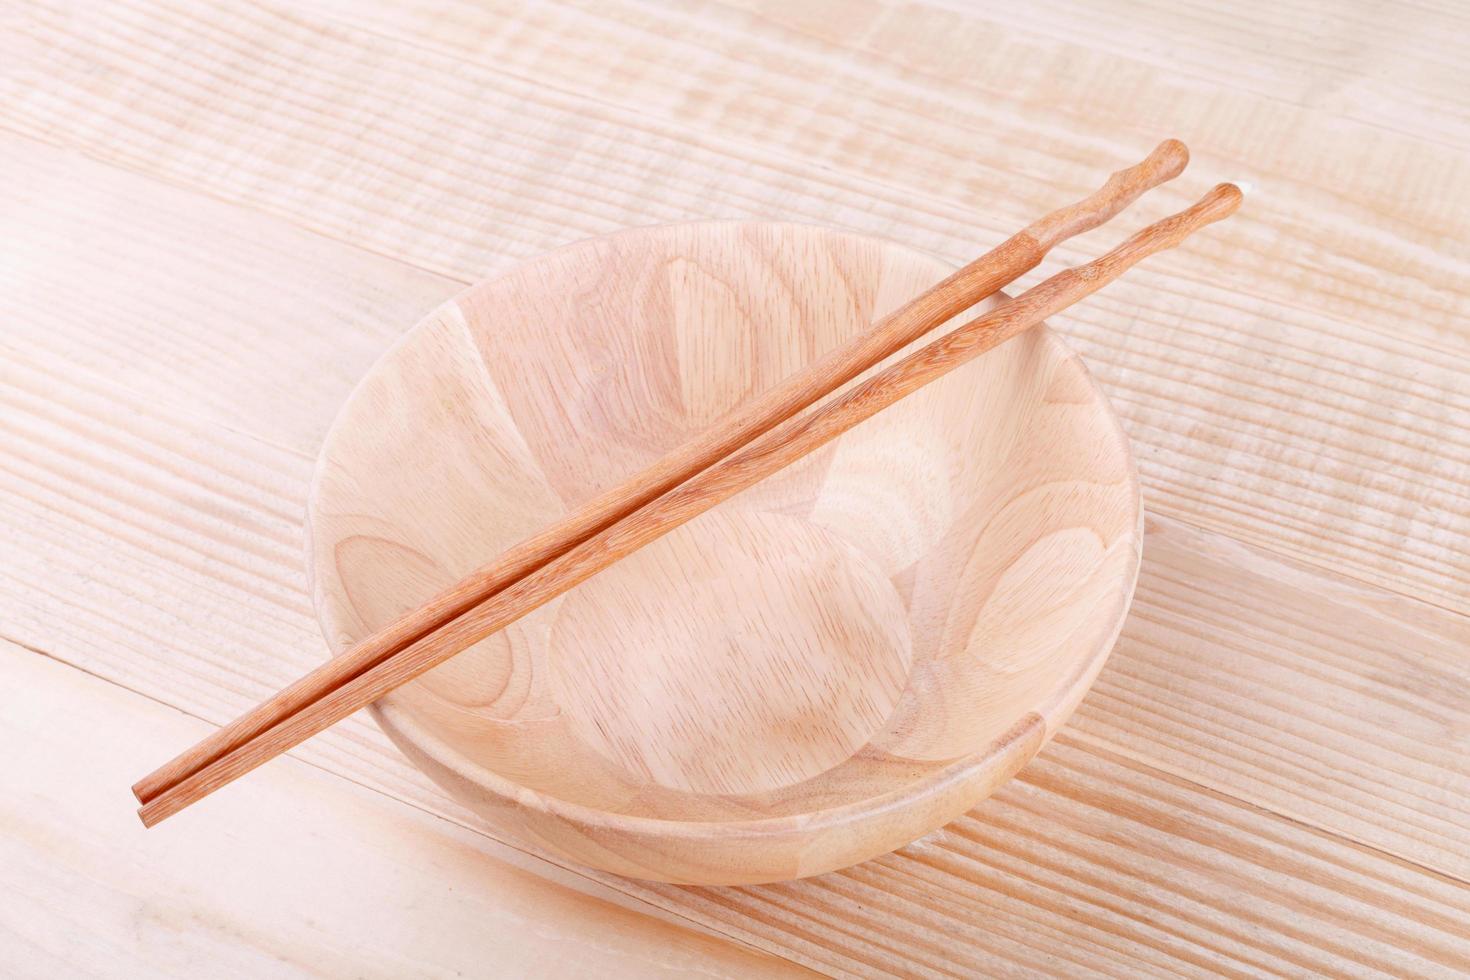 Chopsticks in asian set table on wood background photo